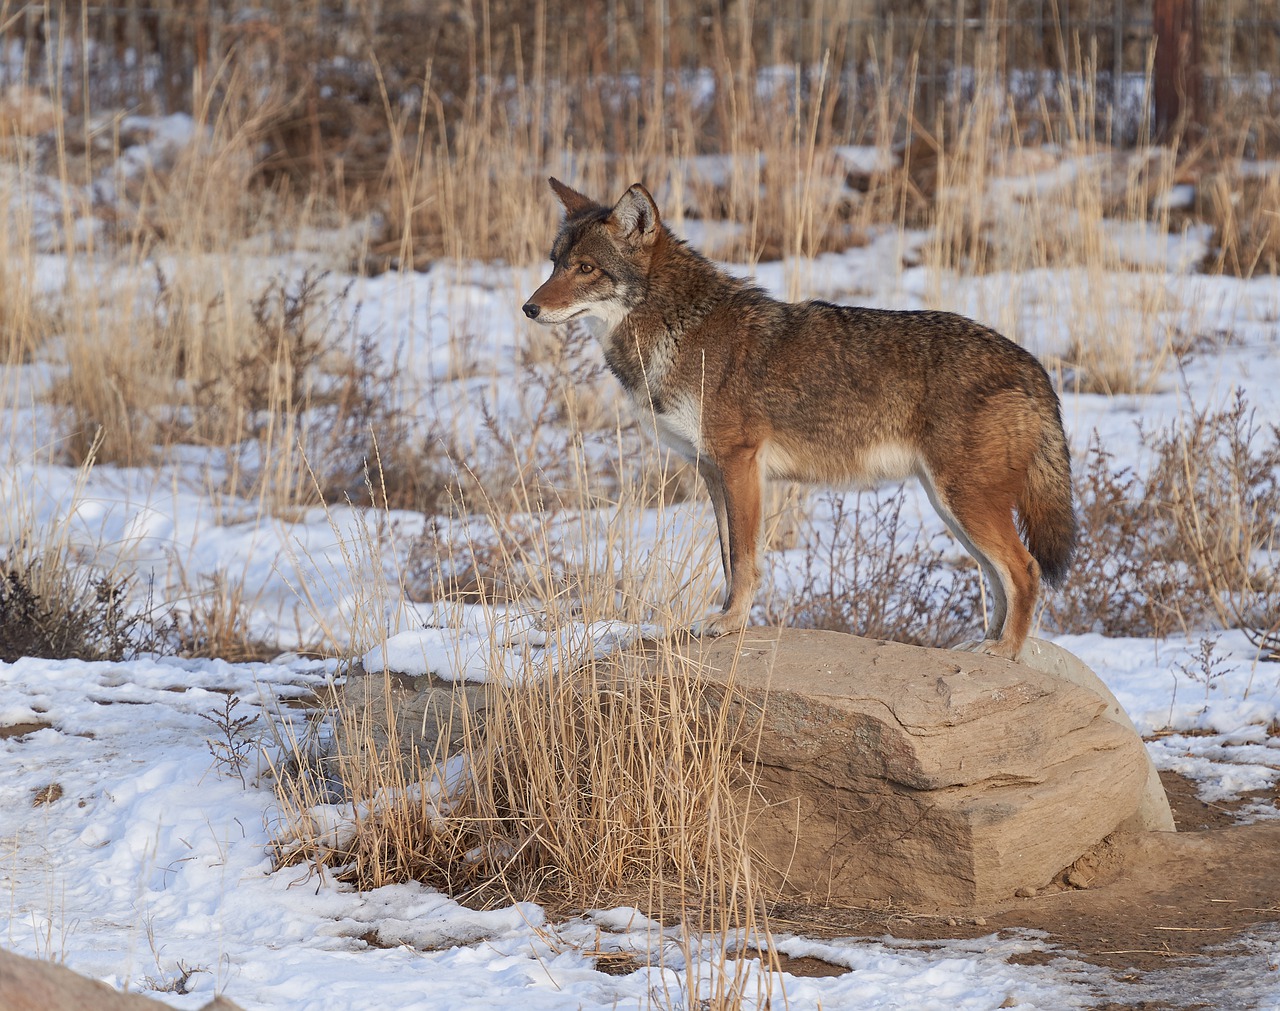 A coyote shown standinb on a rock with some snow on the ground